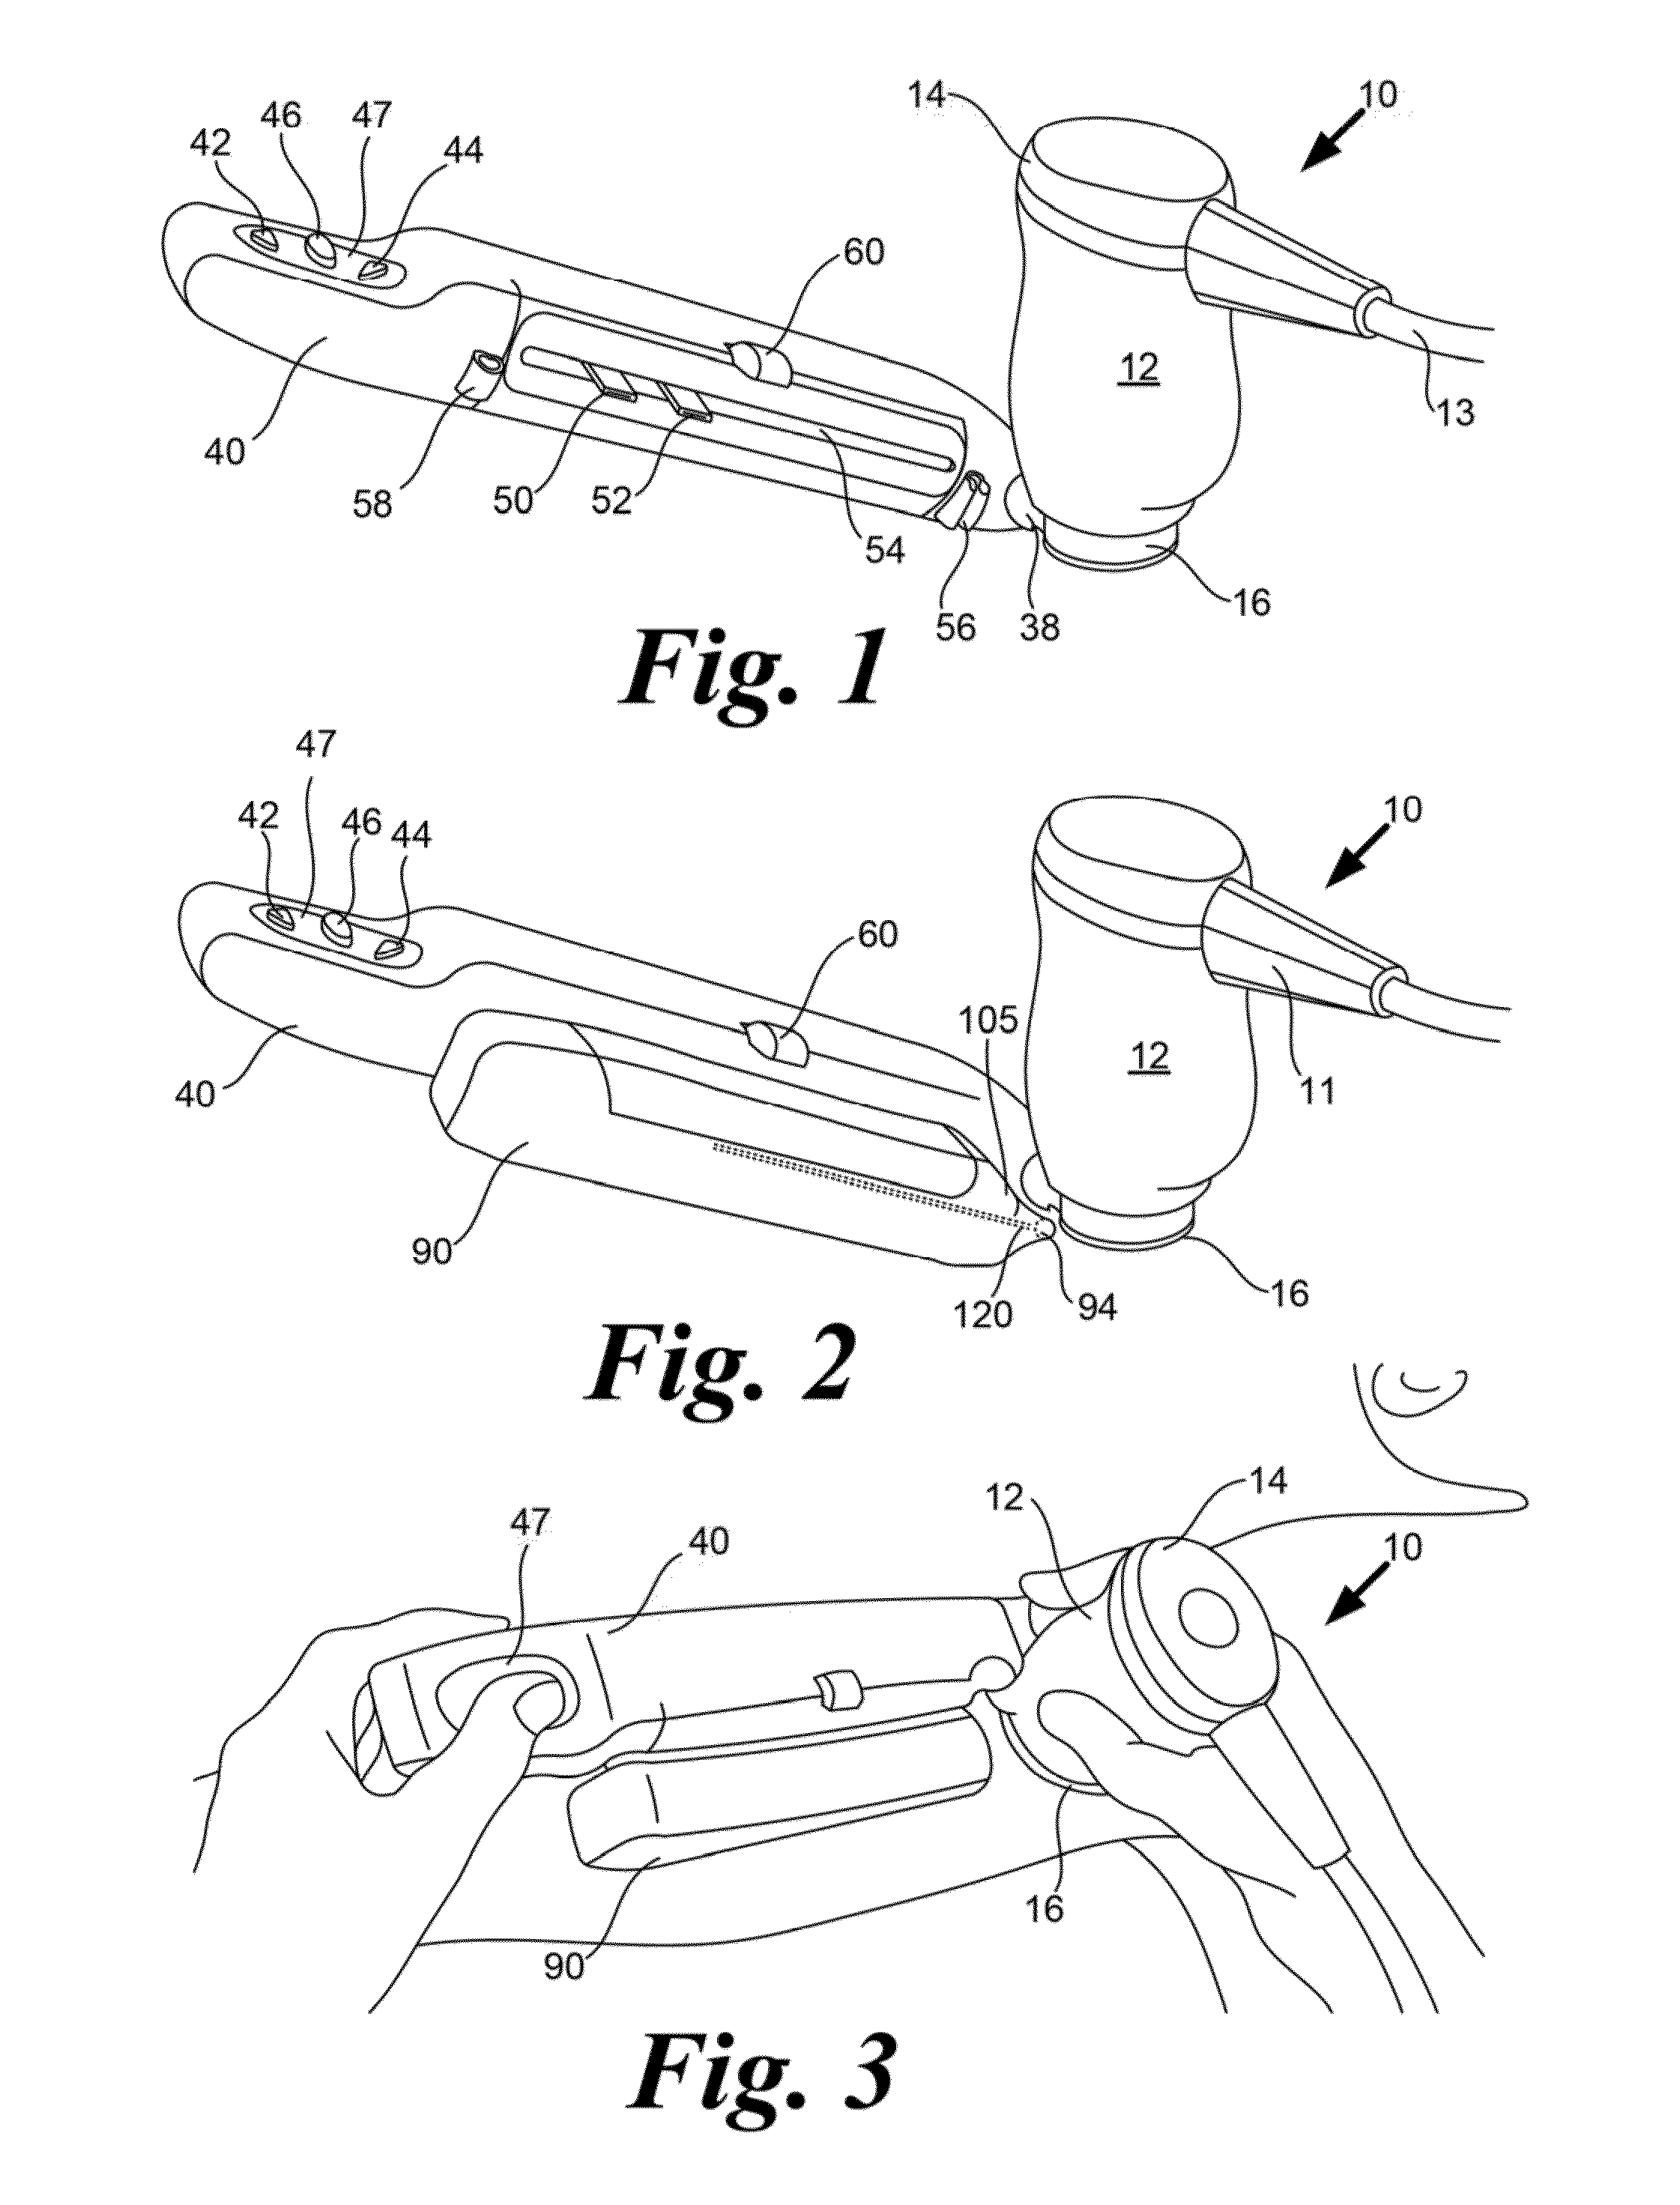 Cartridge for a blood vessel access system and device